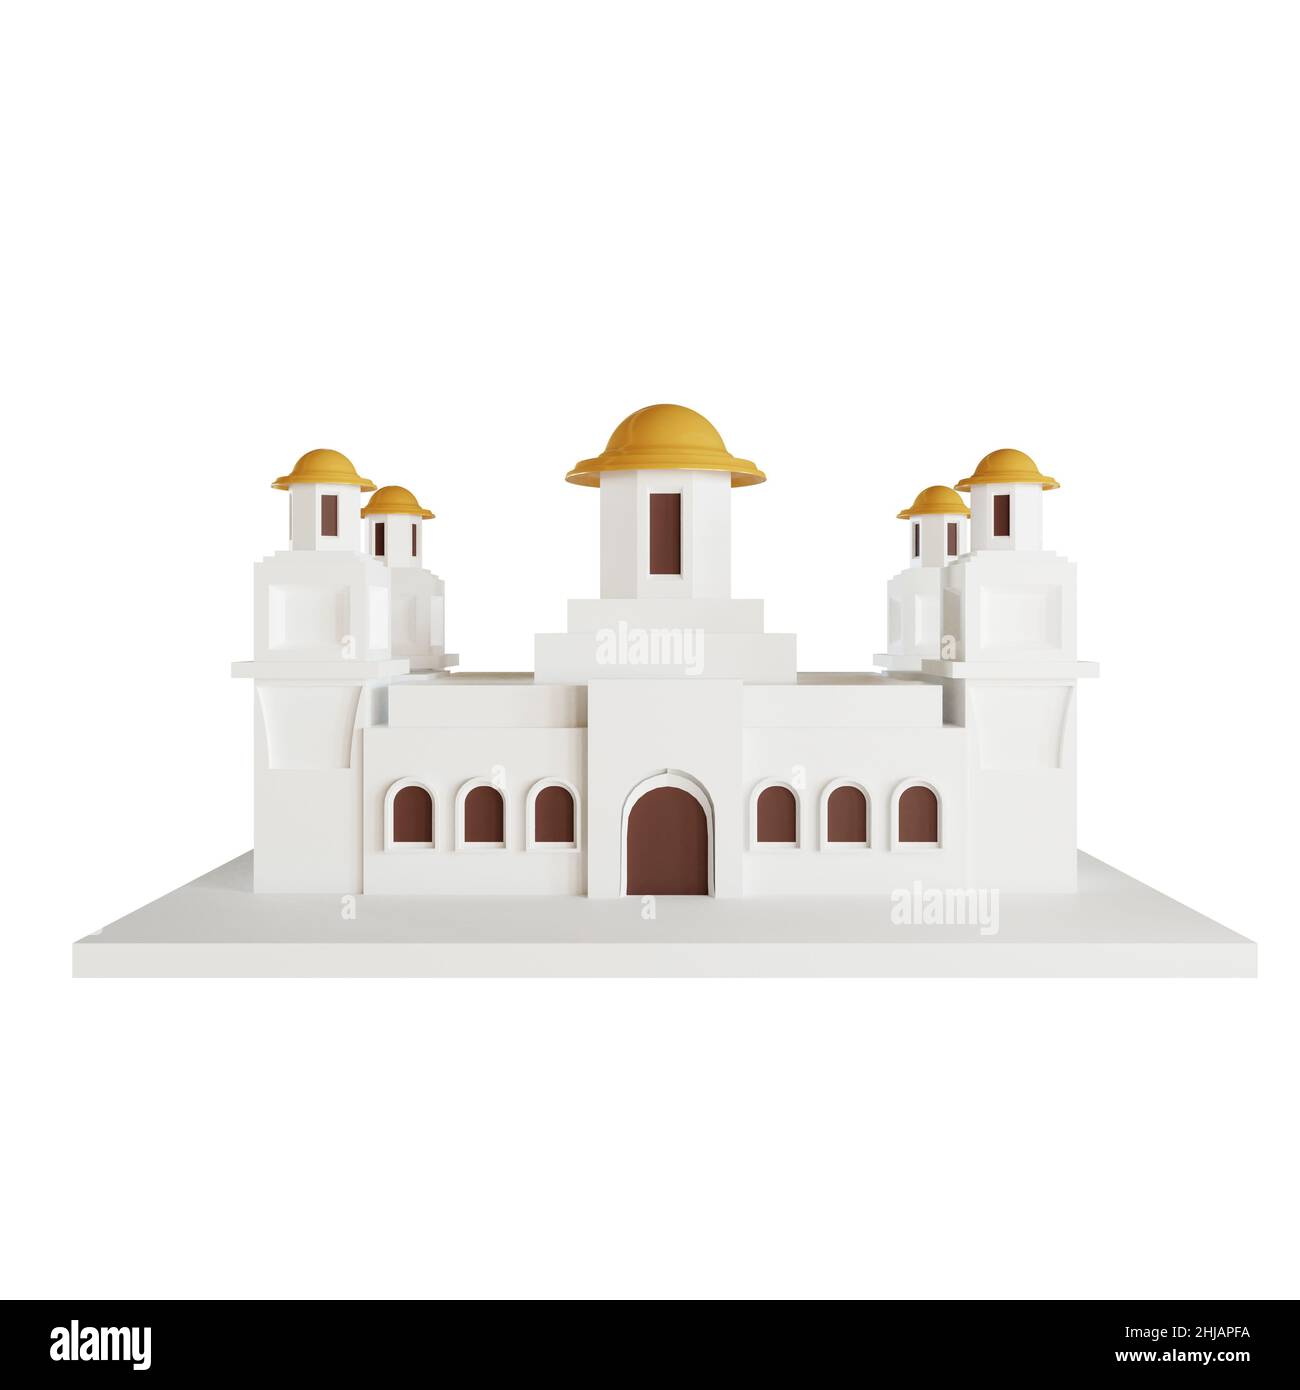 3d illustration of Islamic architectural mosque building Stock Photo